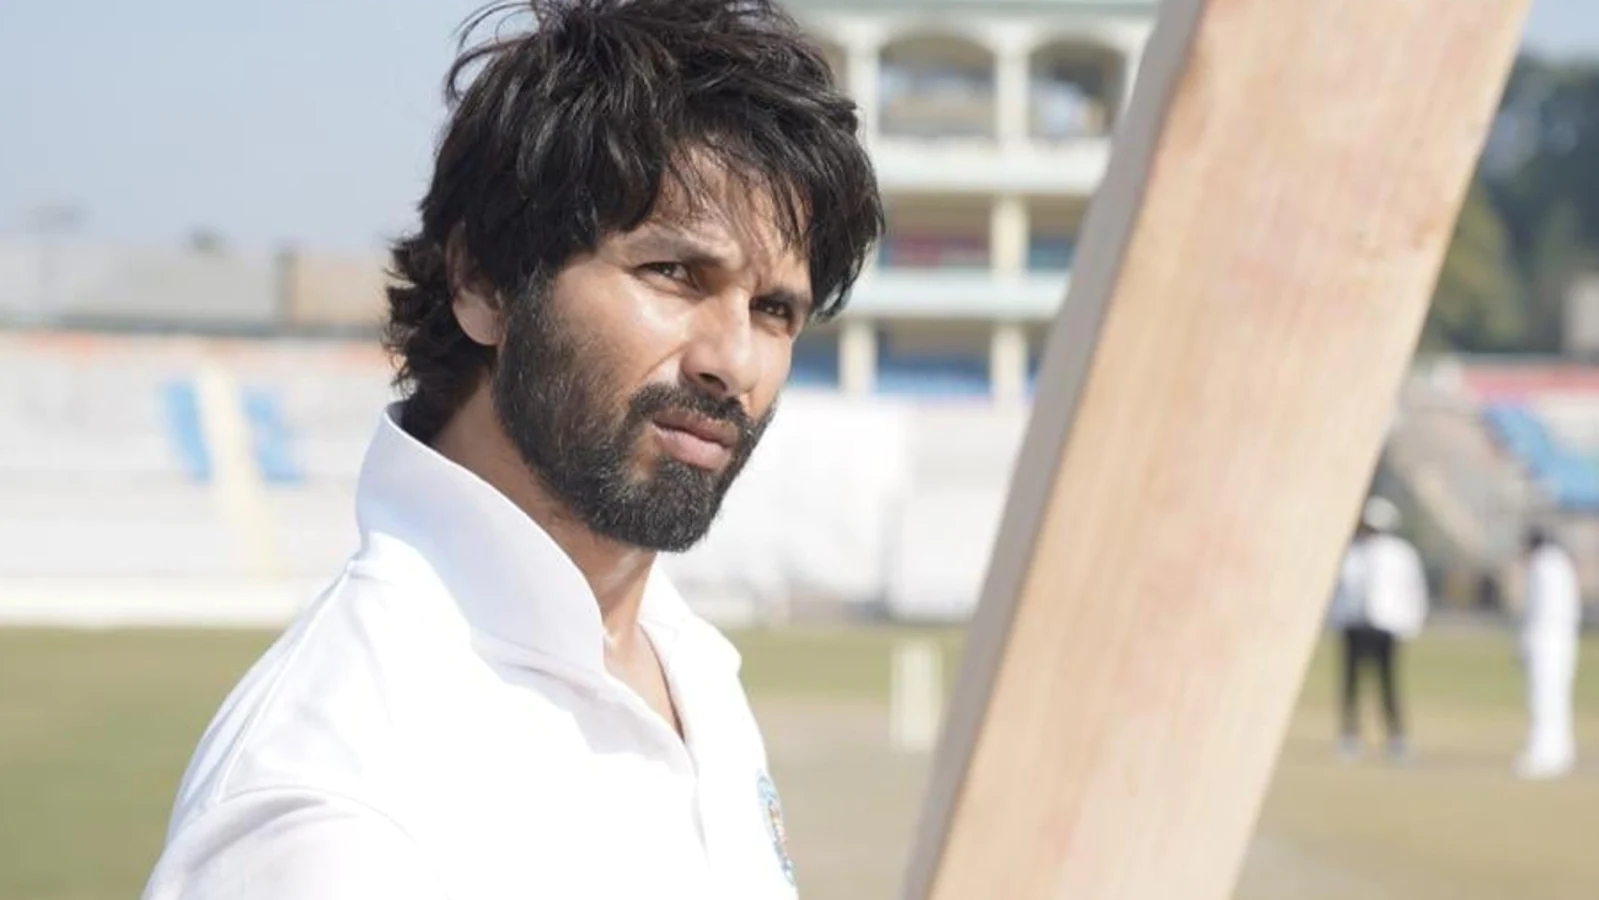 Jersey box office day 4 collection: Shahid Kapoor’s film sees huge drop, collects only ₹1.7 crore on first Monday